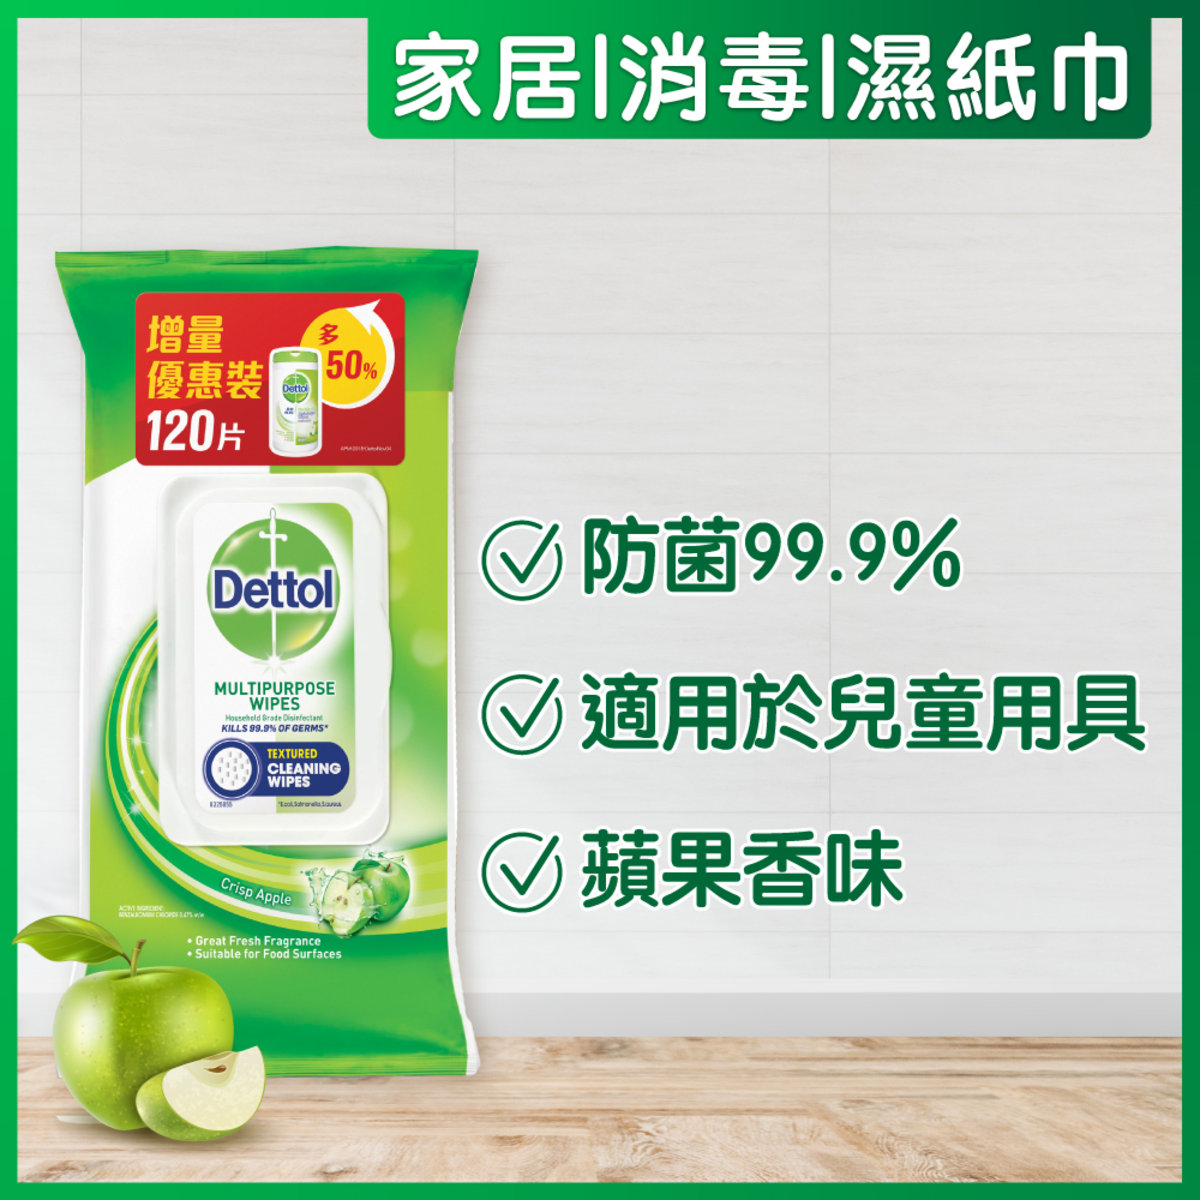 Dettol Anti-Bacterial Multi-purpose Wet Wipes (Disinfecting Wipes) (Green Apple) 120s